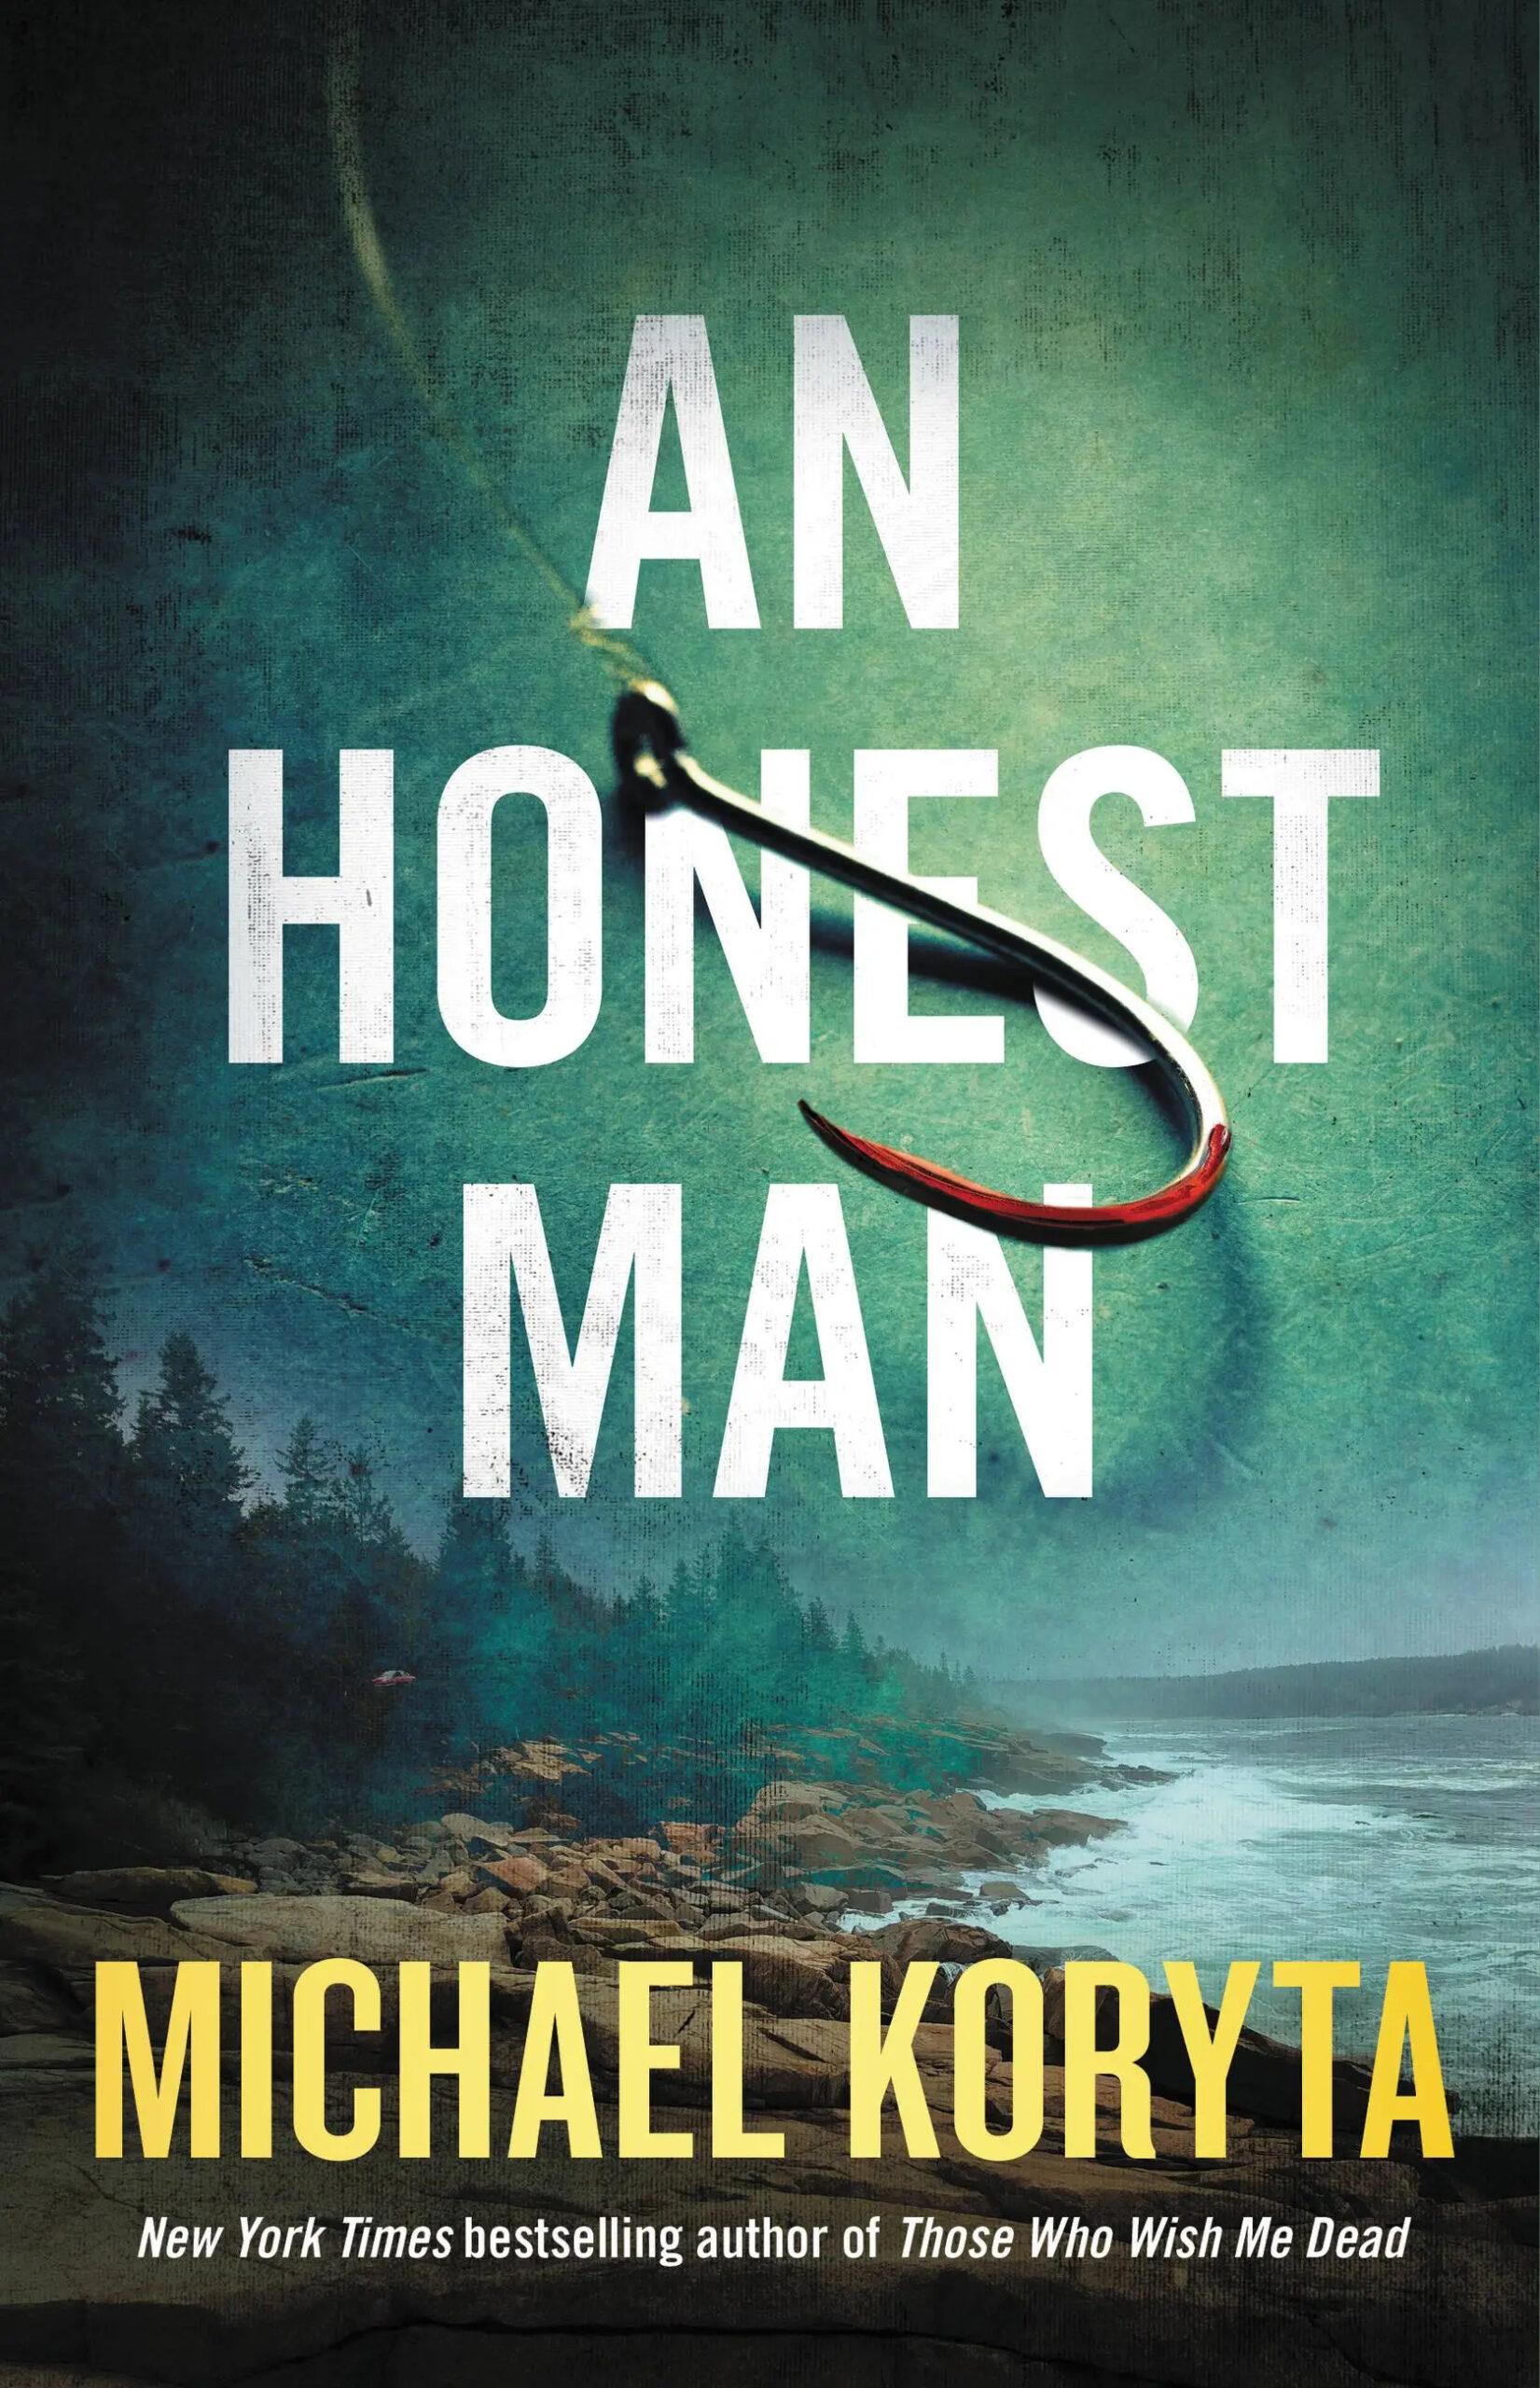 New Crime Novels from Louise Penny and Silvia Moreno-Garcia - The